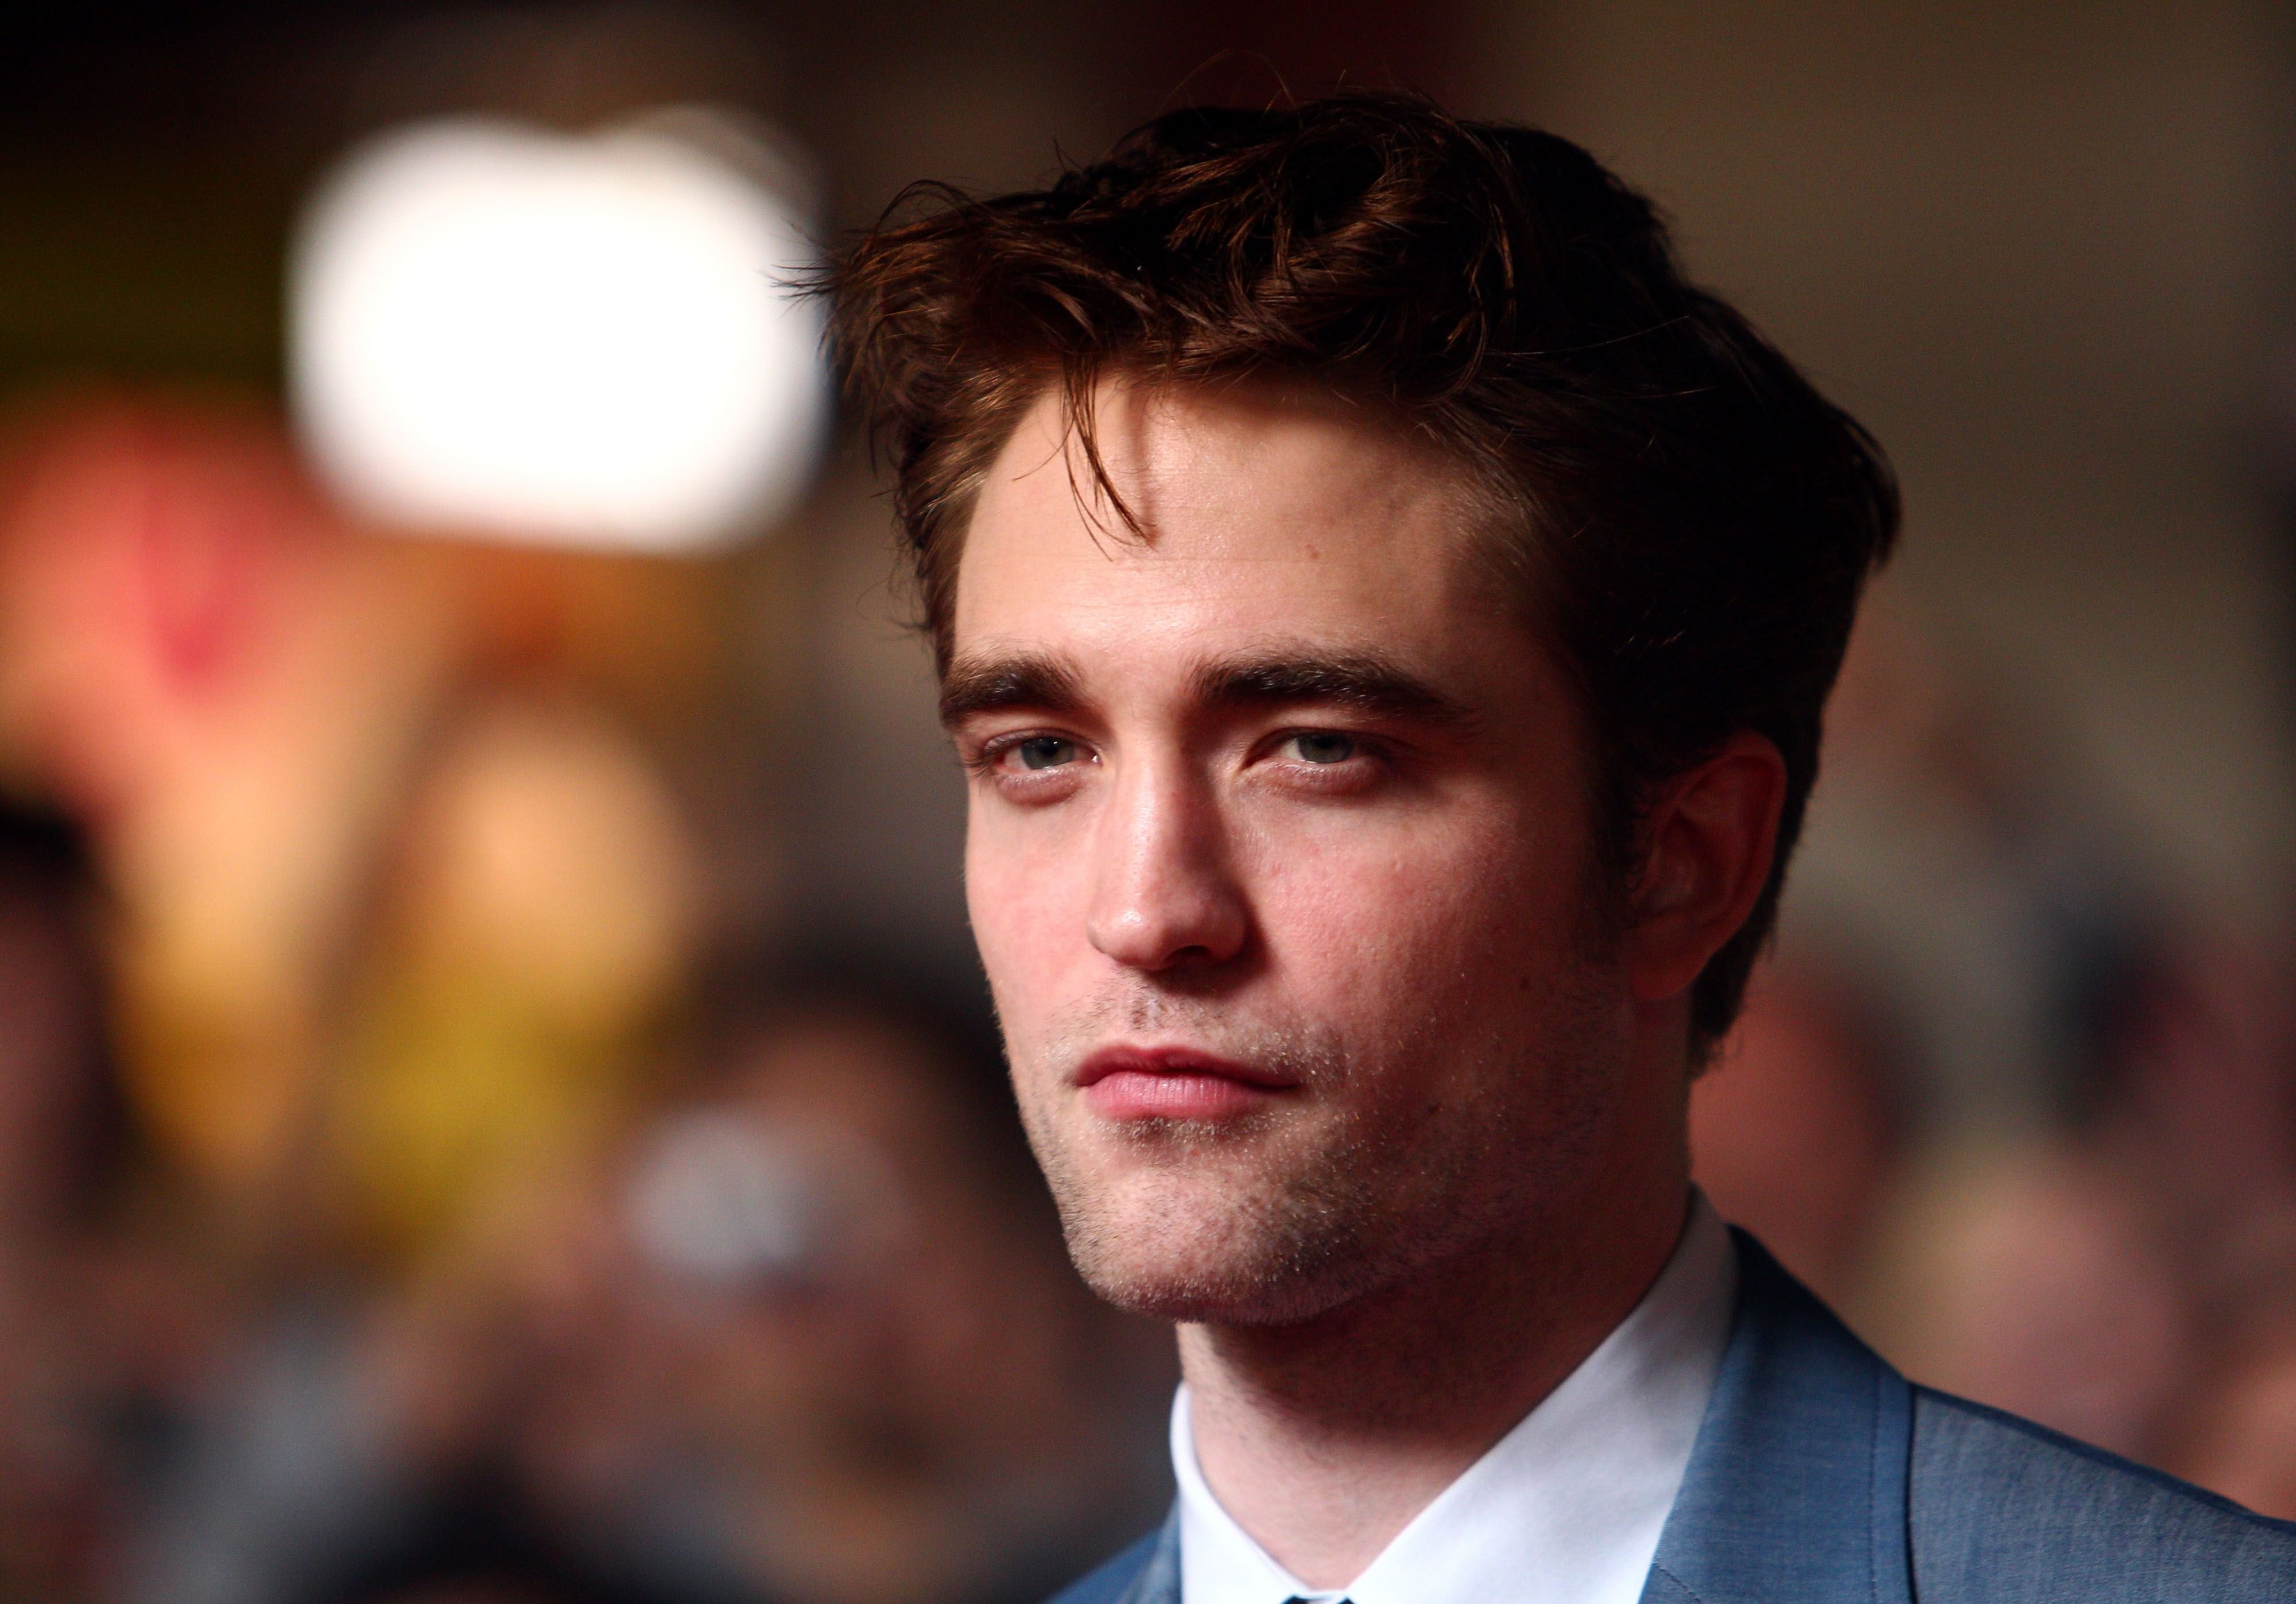 Robert Pattinson during the "Water for Elephants" Sydney Premiere at the State Theatre on May 6, 2011 in Sydney, Australia. | Source: Getty Images